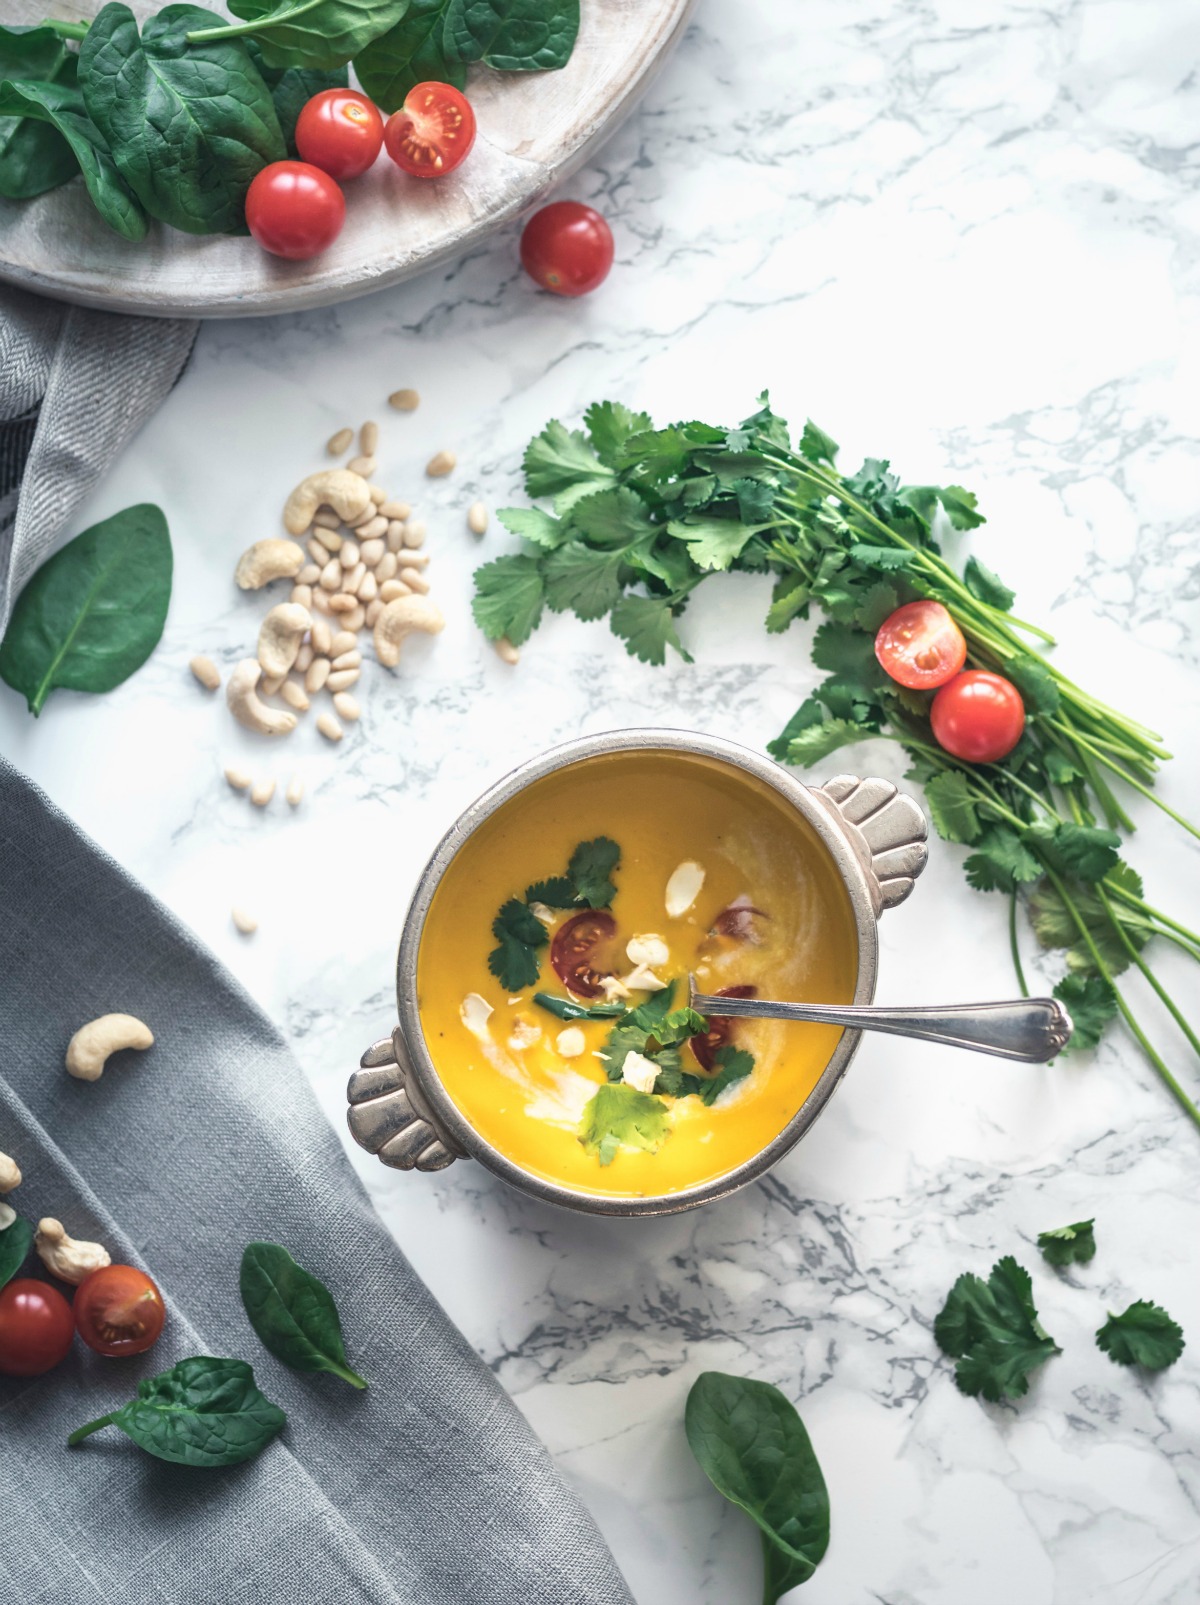 A Warming Turmeric Cauliflower Soup For Chilly Winter Days | Herbal Academy | There is nothing better than a warm bowl of soup on a chilly winter’s day. Give our Turmeric Cauliflower Soup a try and stay warm!